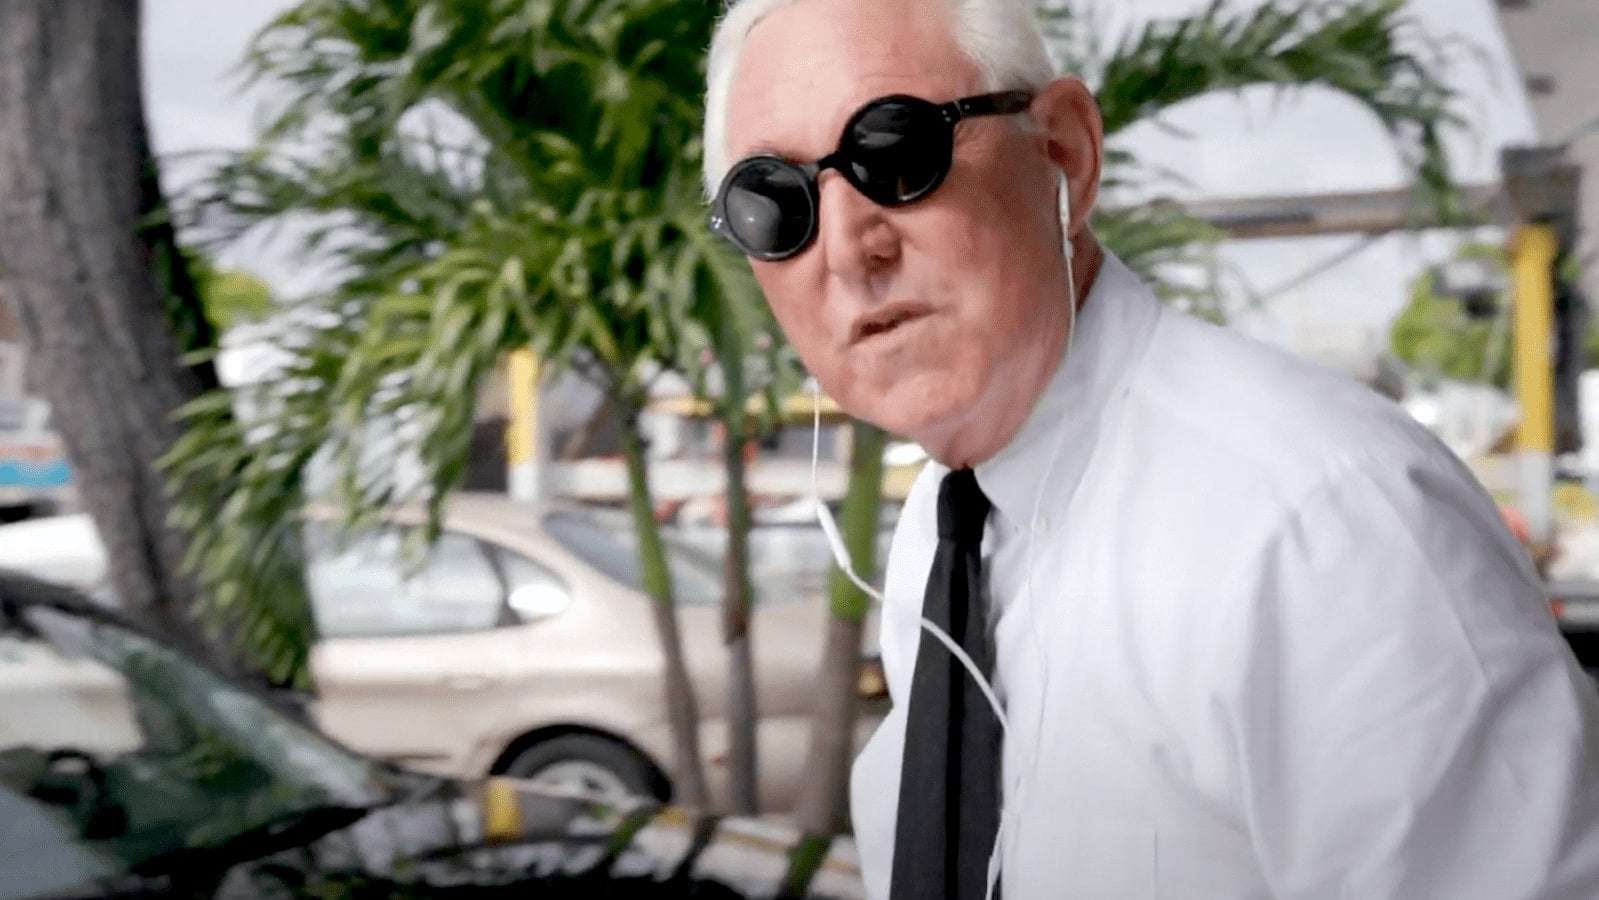 image for Revealed: Roger Stone’s Secret Call With Proud Boys Leader in Lead-Up to Jan. 6